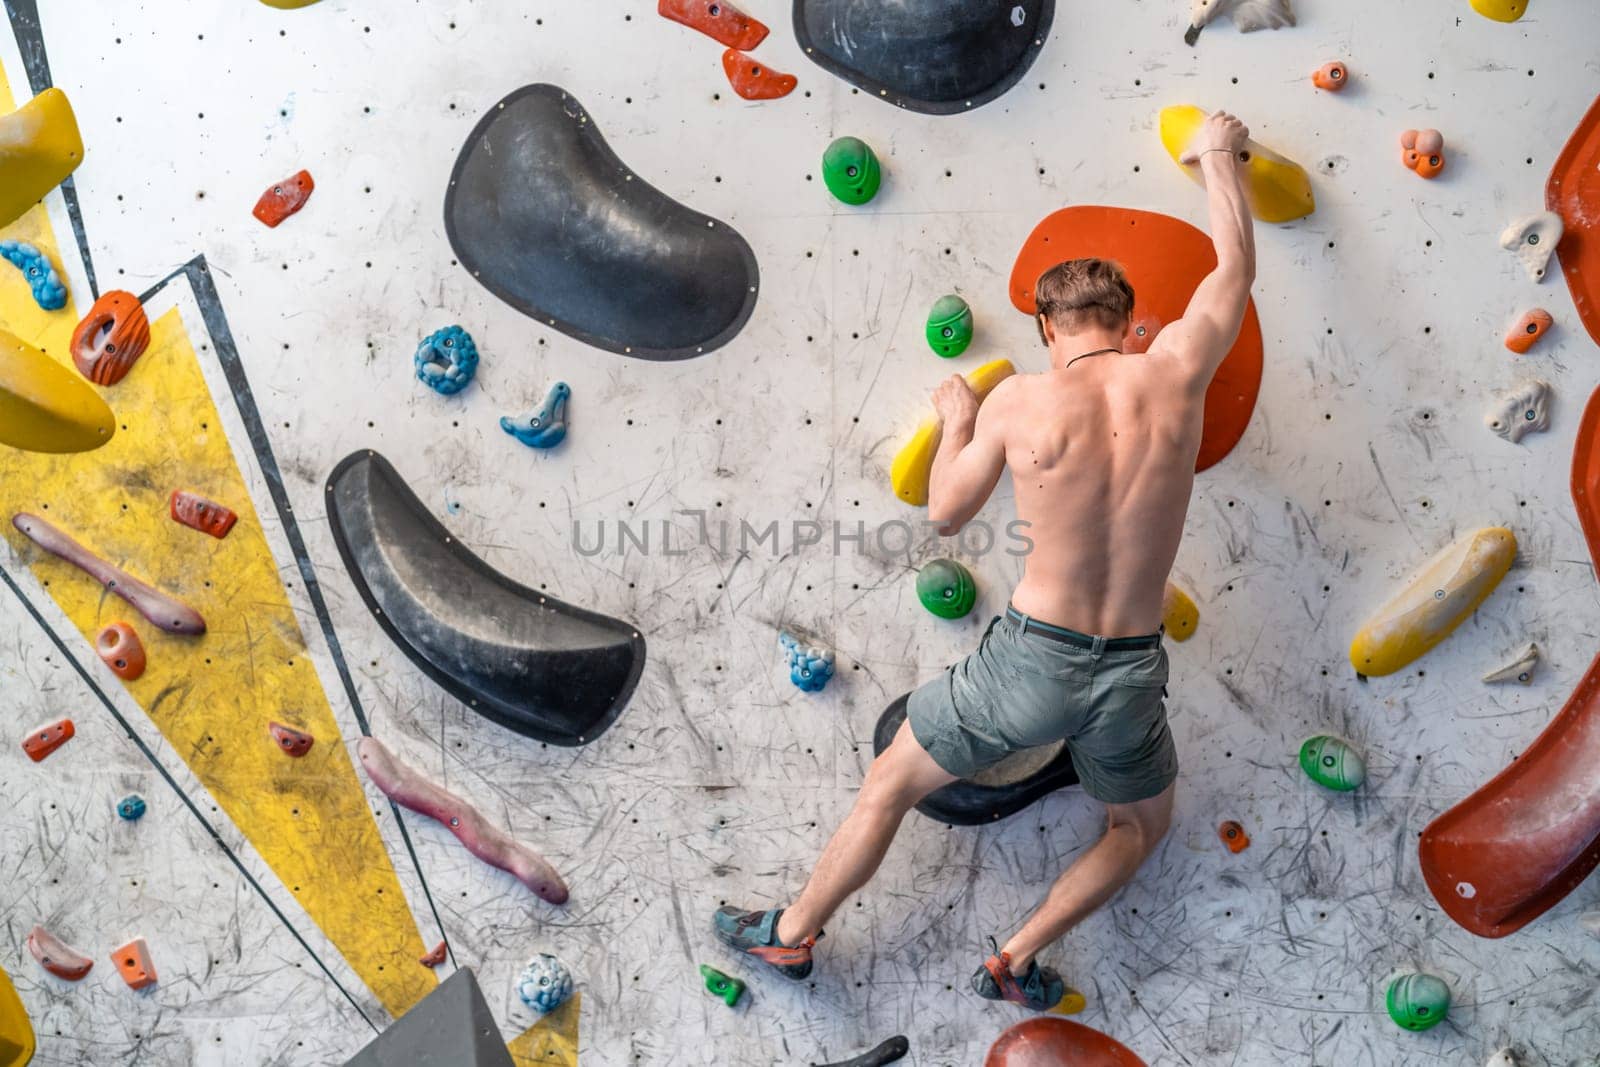 bouldering on an artificial climbing wall. High quality photo